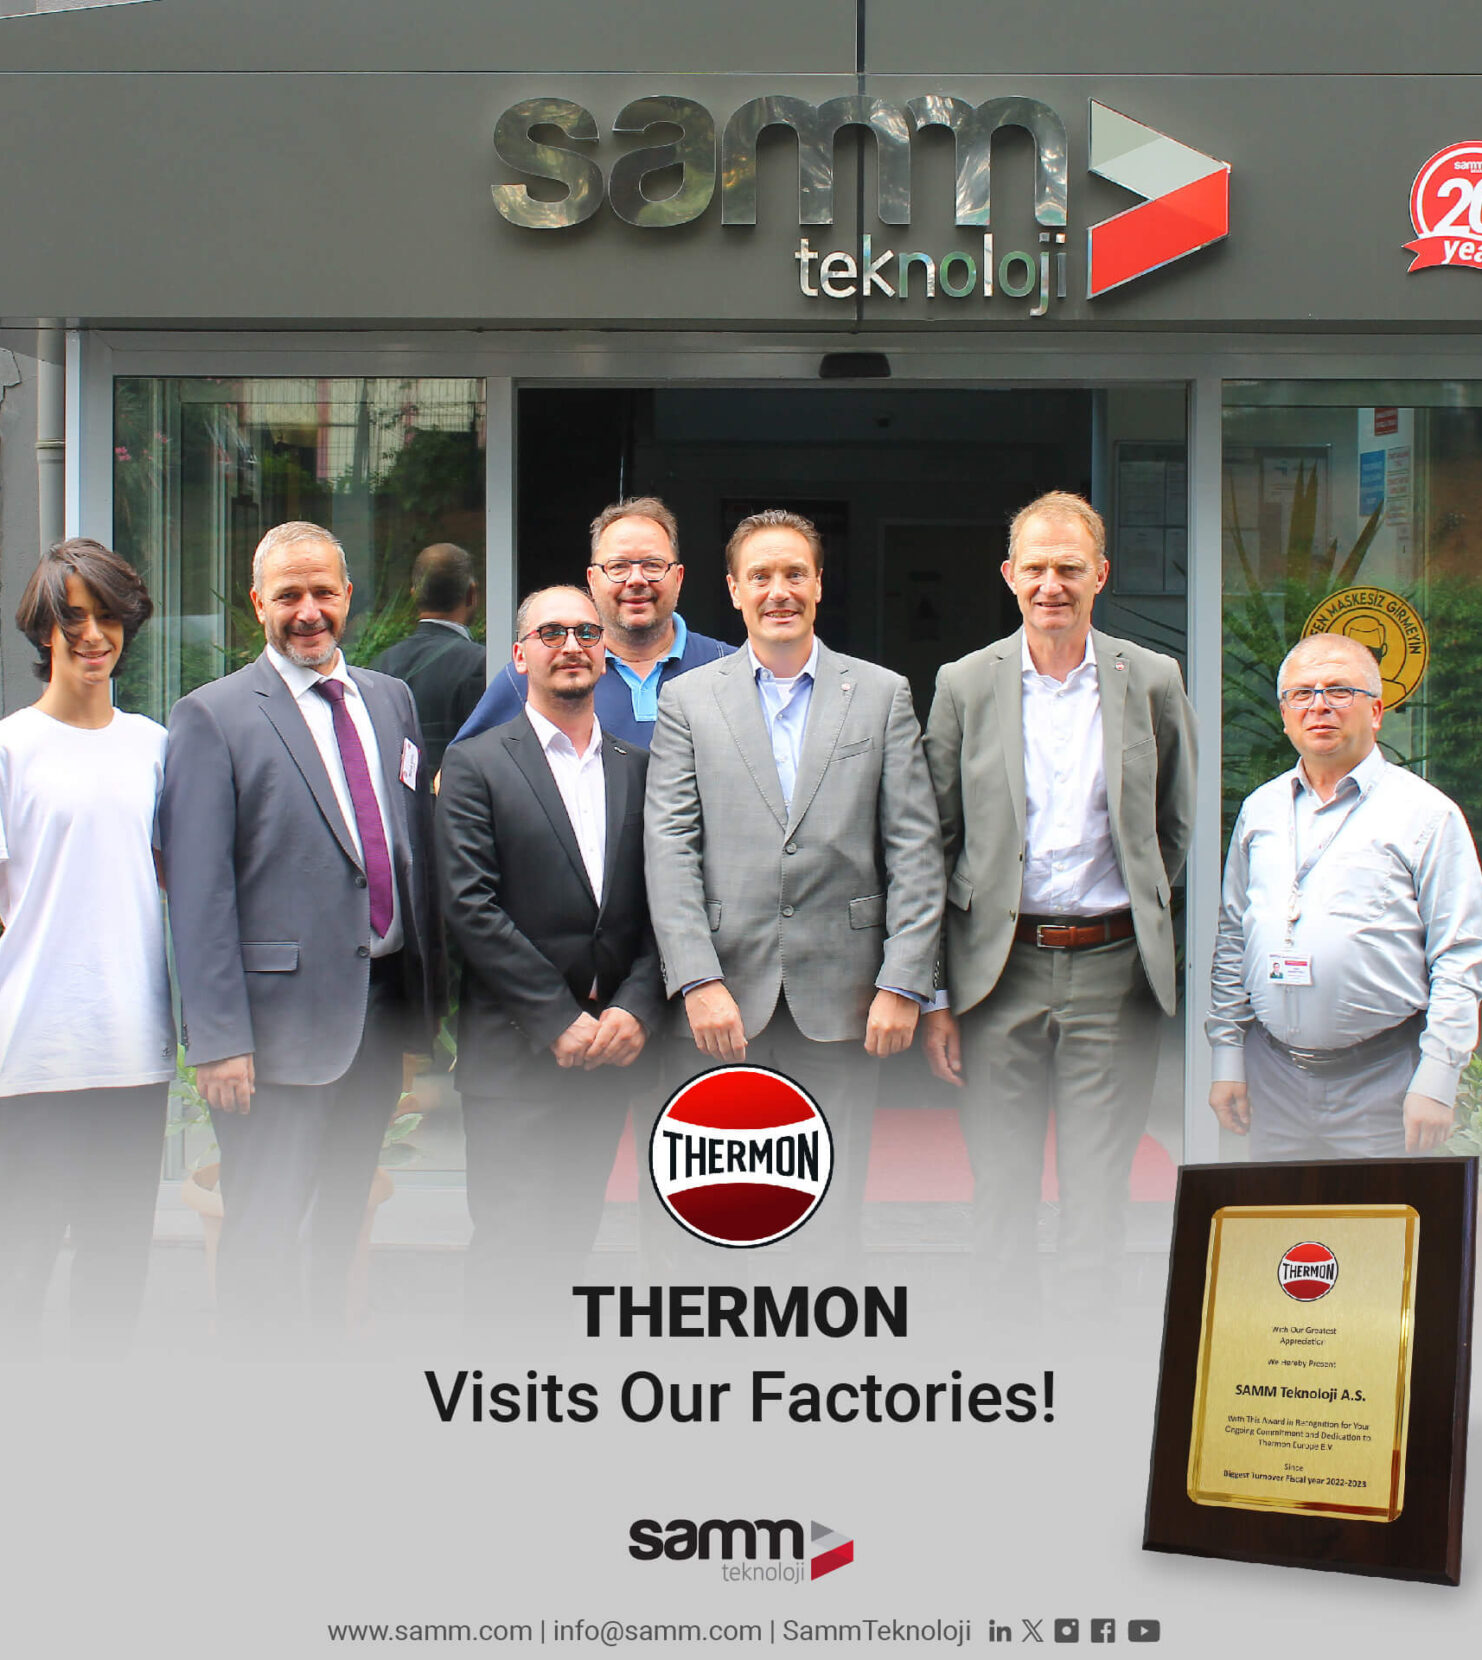 Thermon Visits Samm Teknoloji and Presents an Award for Best Performance - Mr. Michel Salsmans, Thermon Europe B.V.'s EMEA Sales Channels Leader, and Mr. Mathon Weijers, Thermon International Manager Director